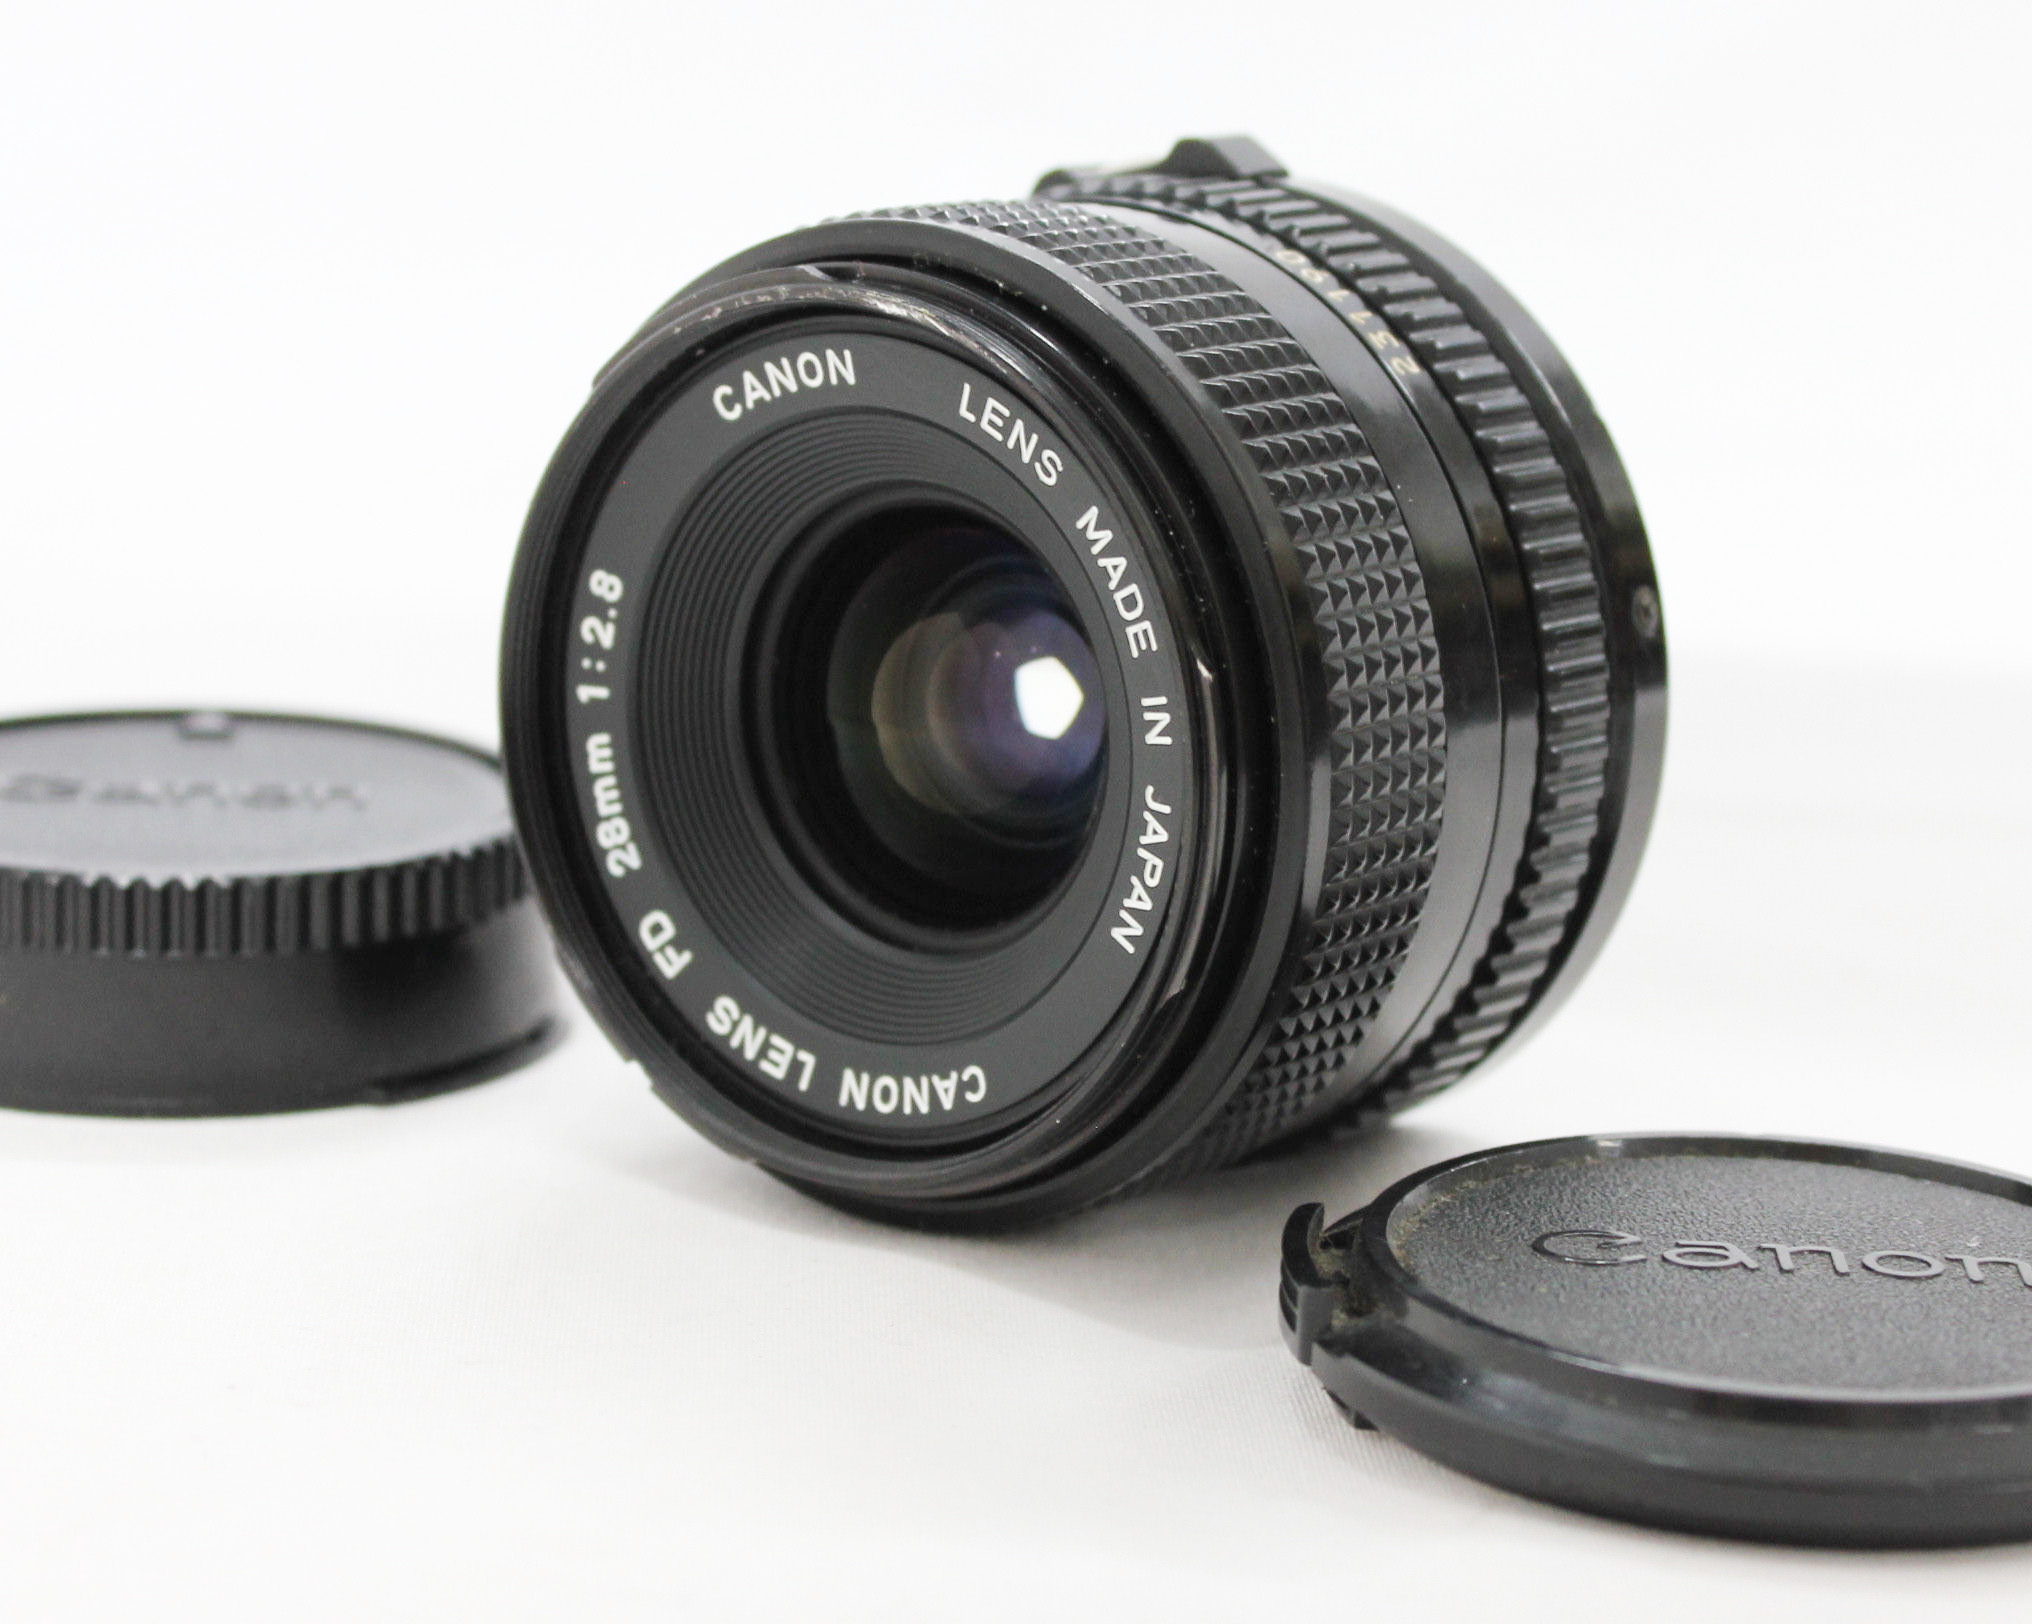 Japan Used Camera Shop | [Excellent++++] Canon New FD NFD 28mm F/2.8 MF Lens from Japan